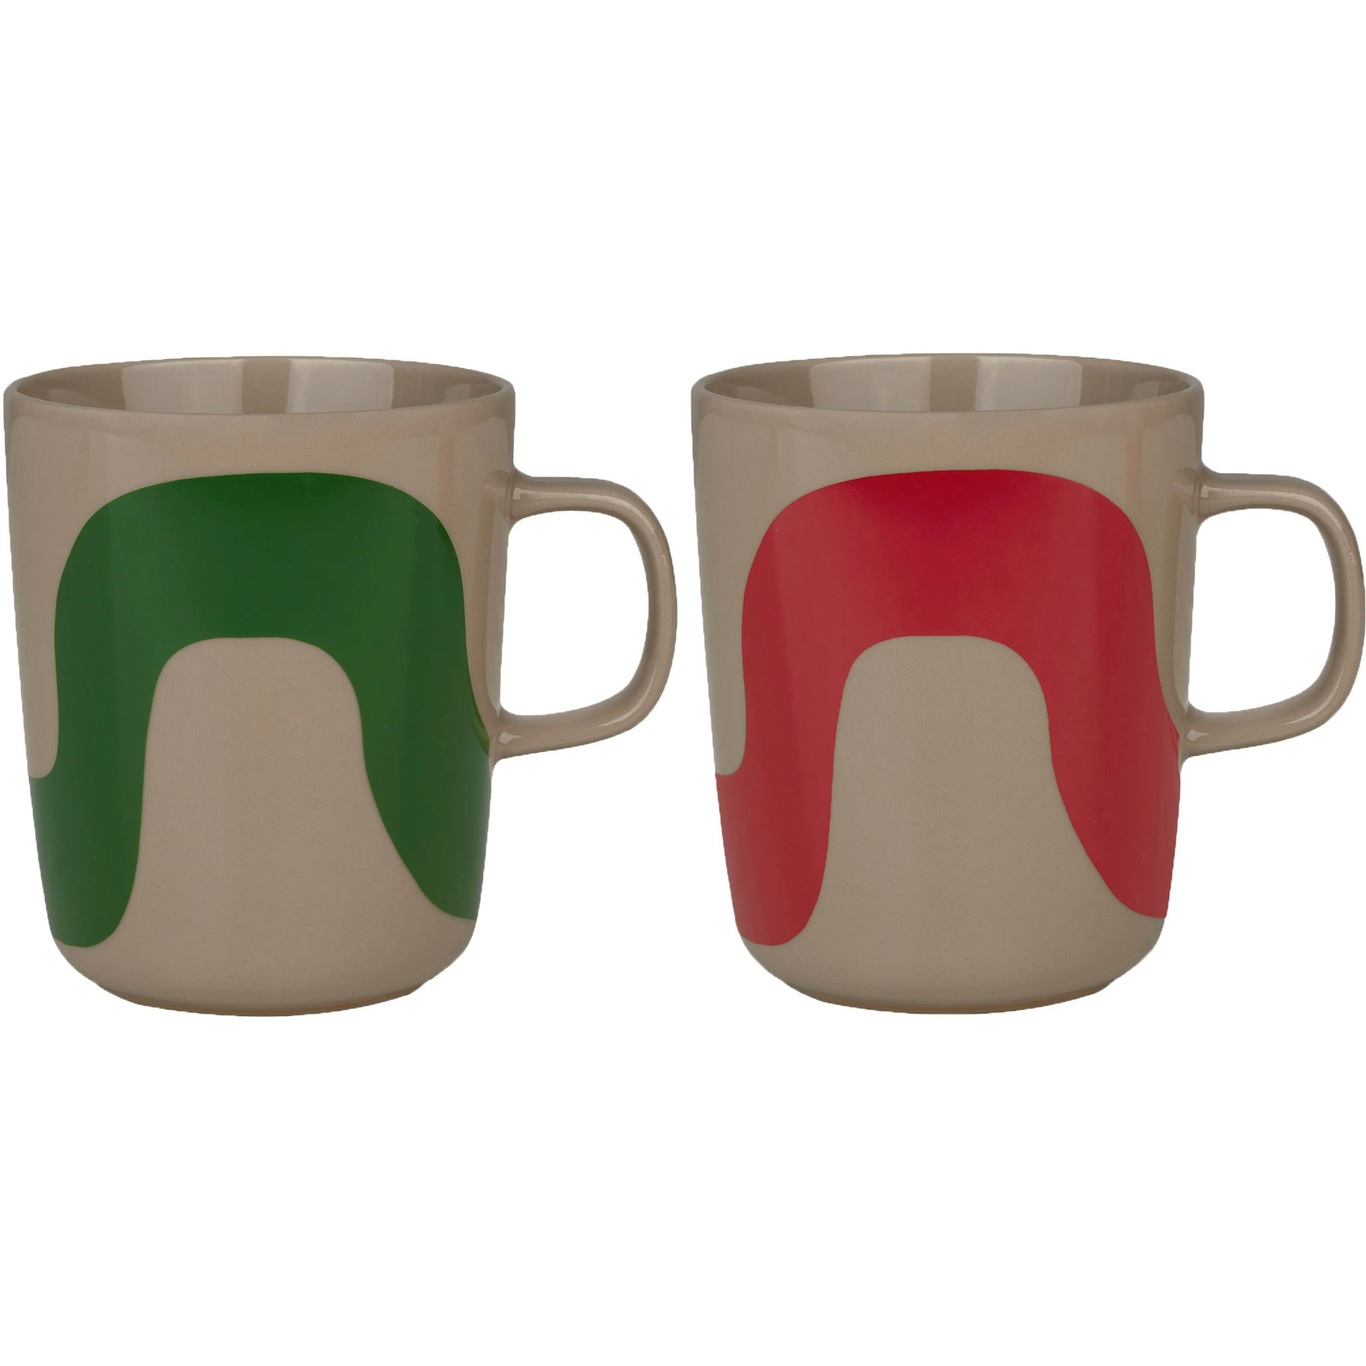 Oiva/Seireeni Coffee Cup 25 cl 2-pack, Terra / Green / Red